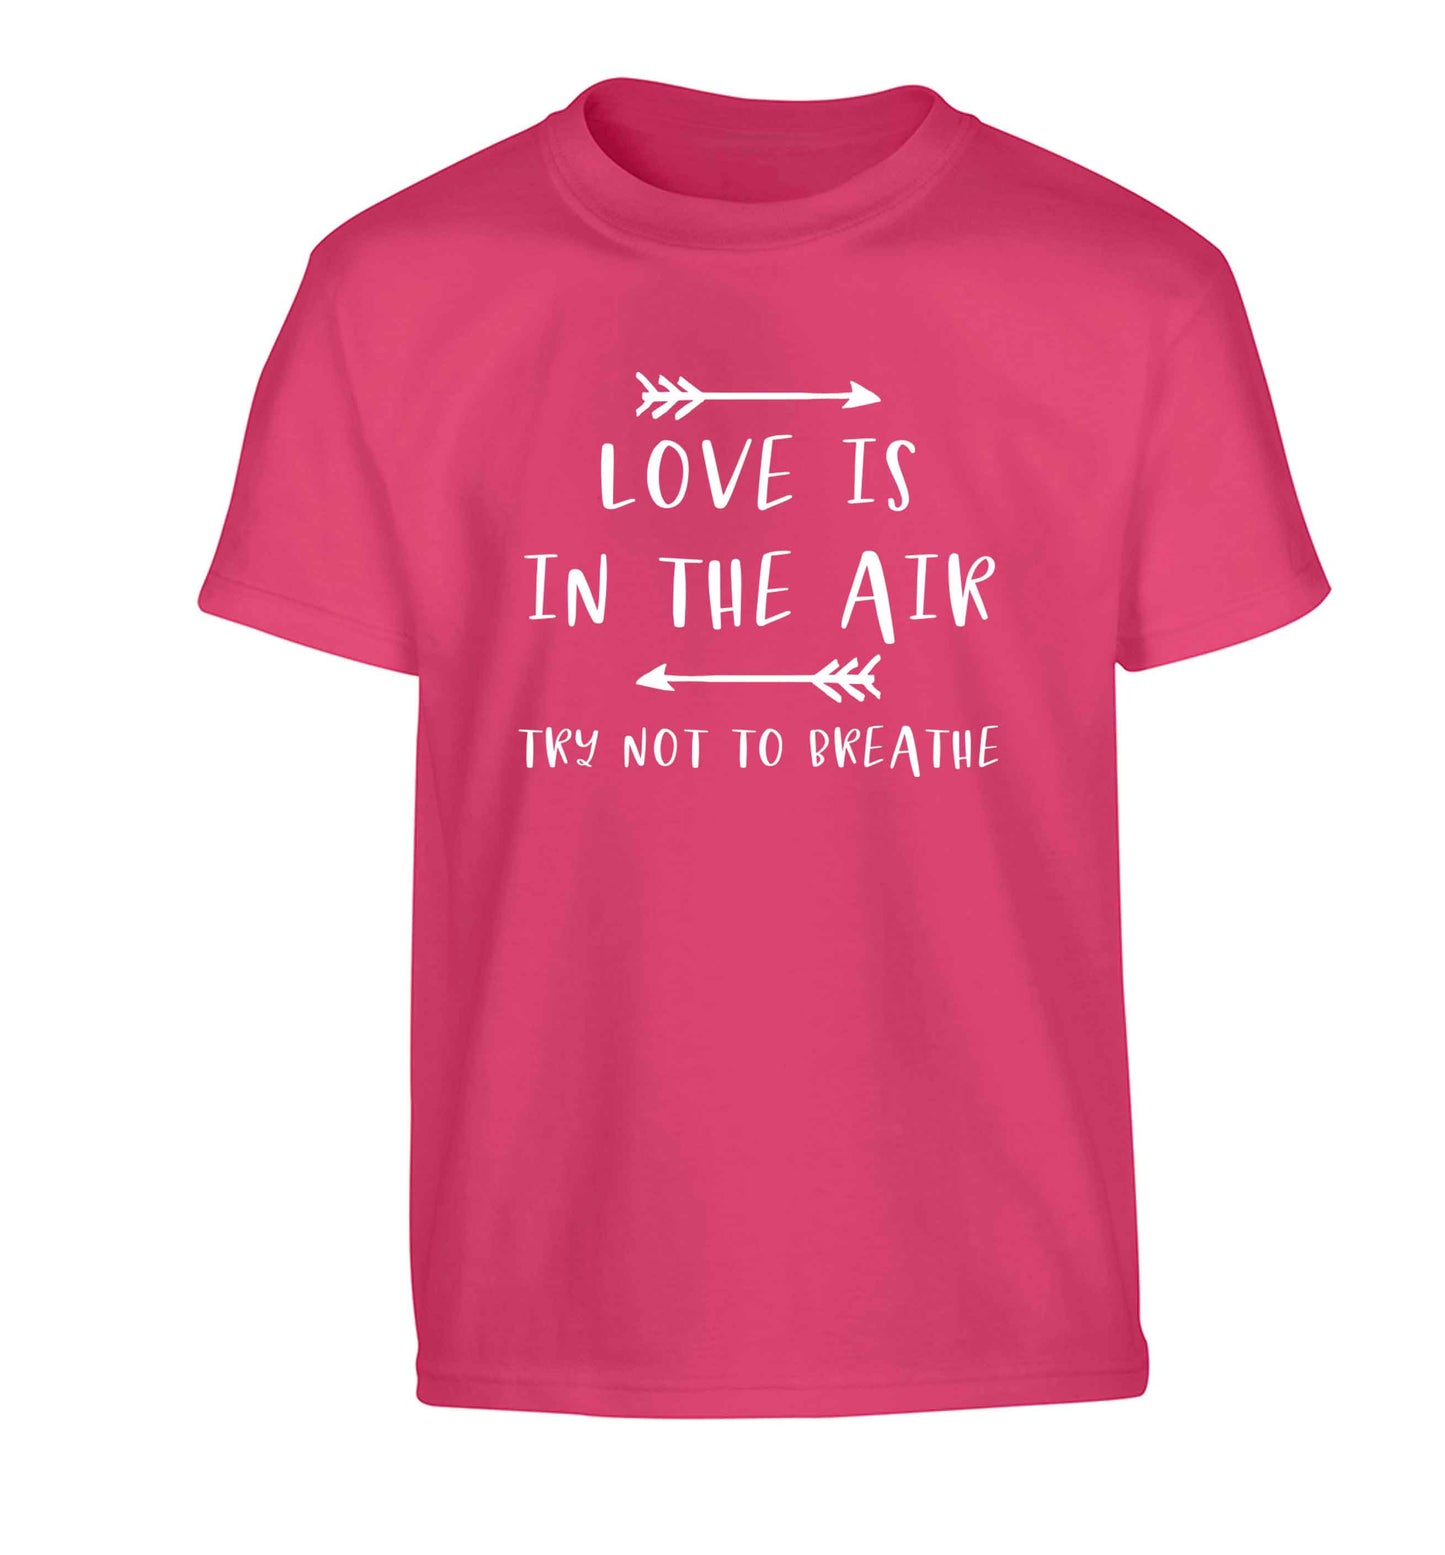 Love is in the air try not to breathe Children's pink Tshirt 12-13 Years